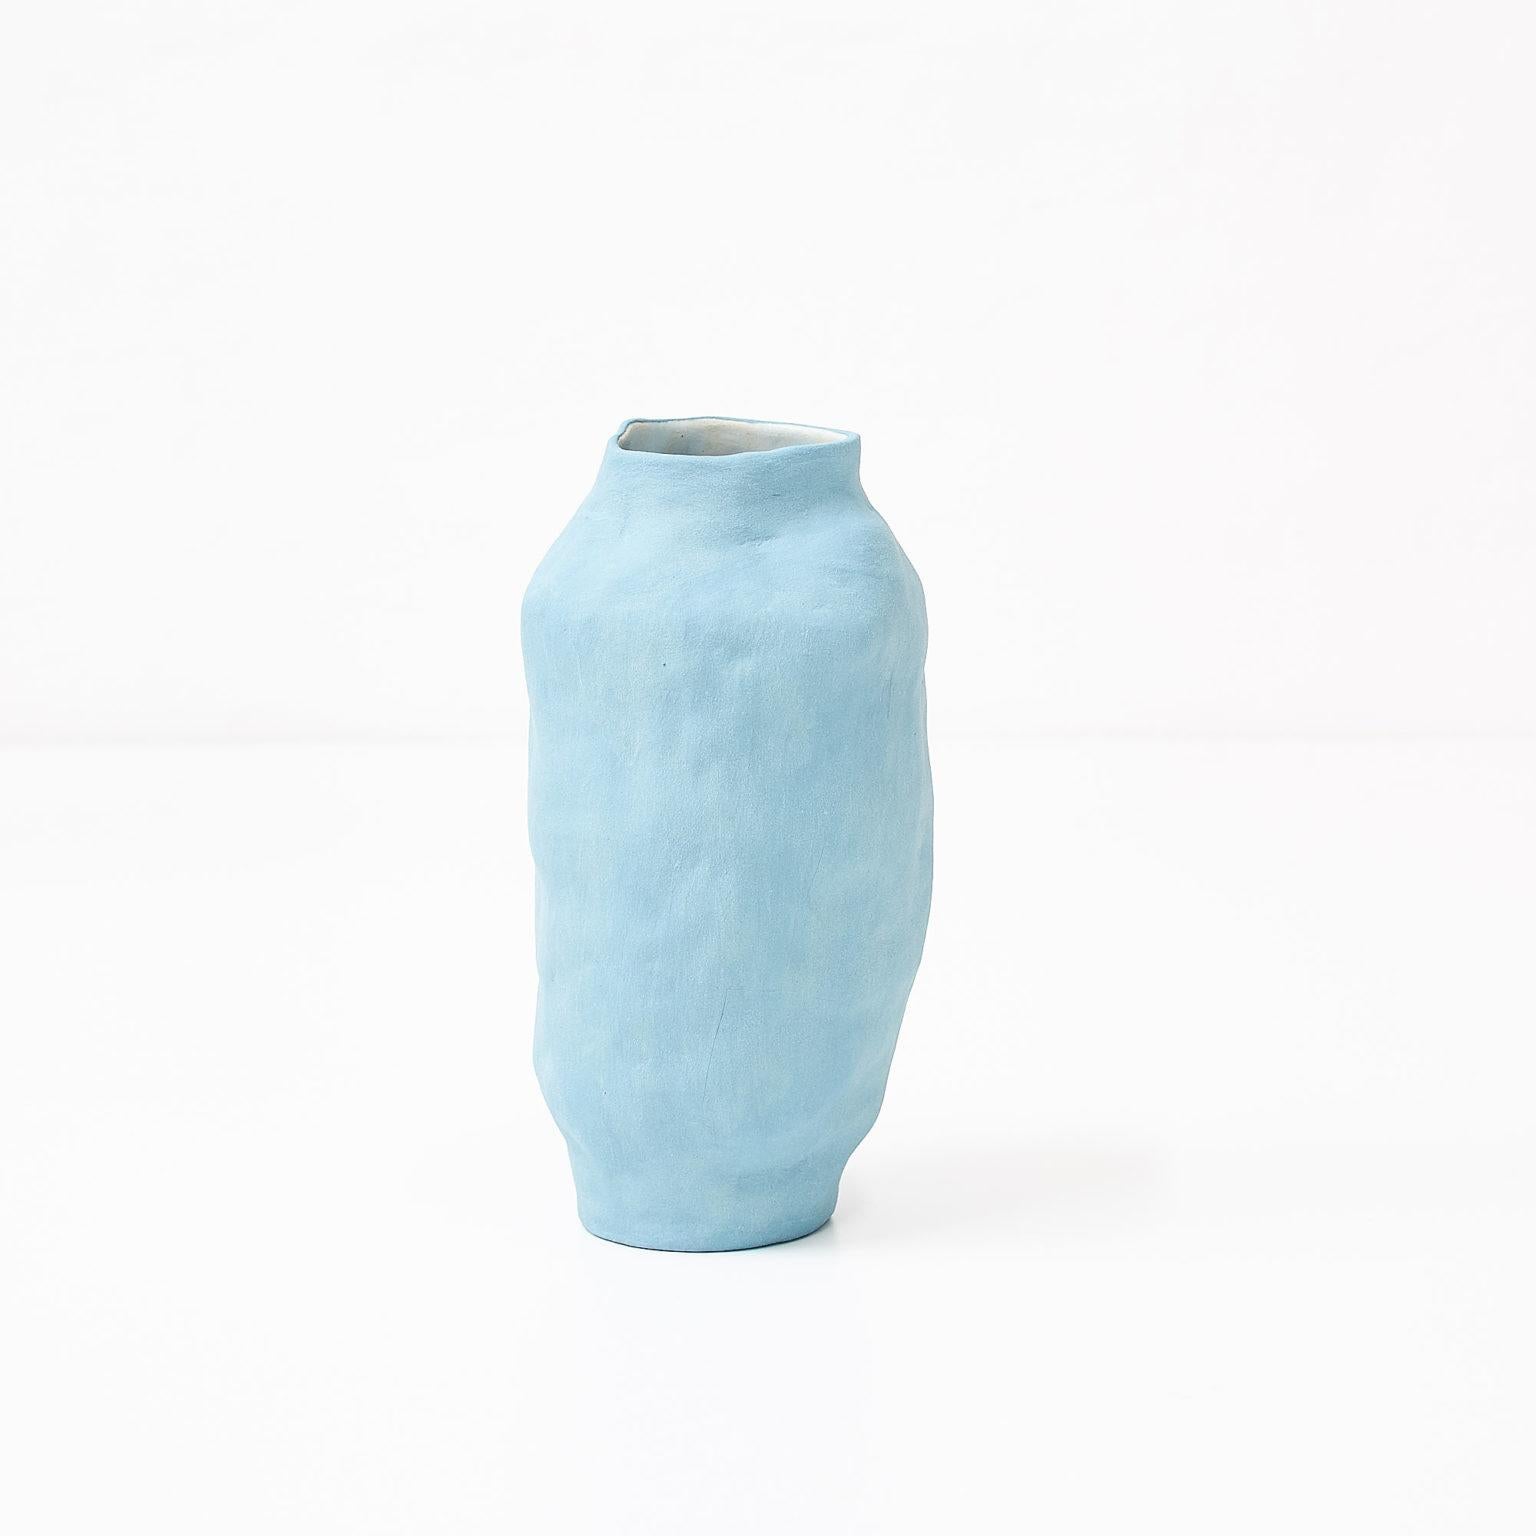 Blue Vase by Siup Studio
Dimensions: D15 x H28 cm
Materials: Ceramics

Siup is a small design studio based in Warsaw. The concept is created by three friends – Martyna Dymek, Marcin Sieczka and Kasia Skoczylas – who have met in University of